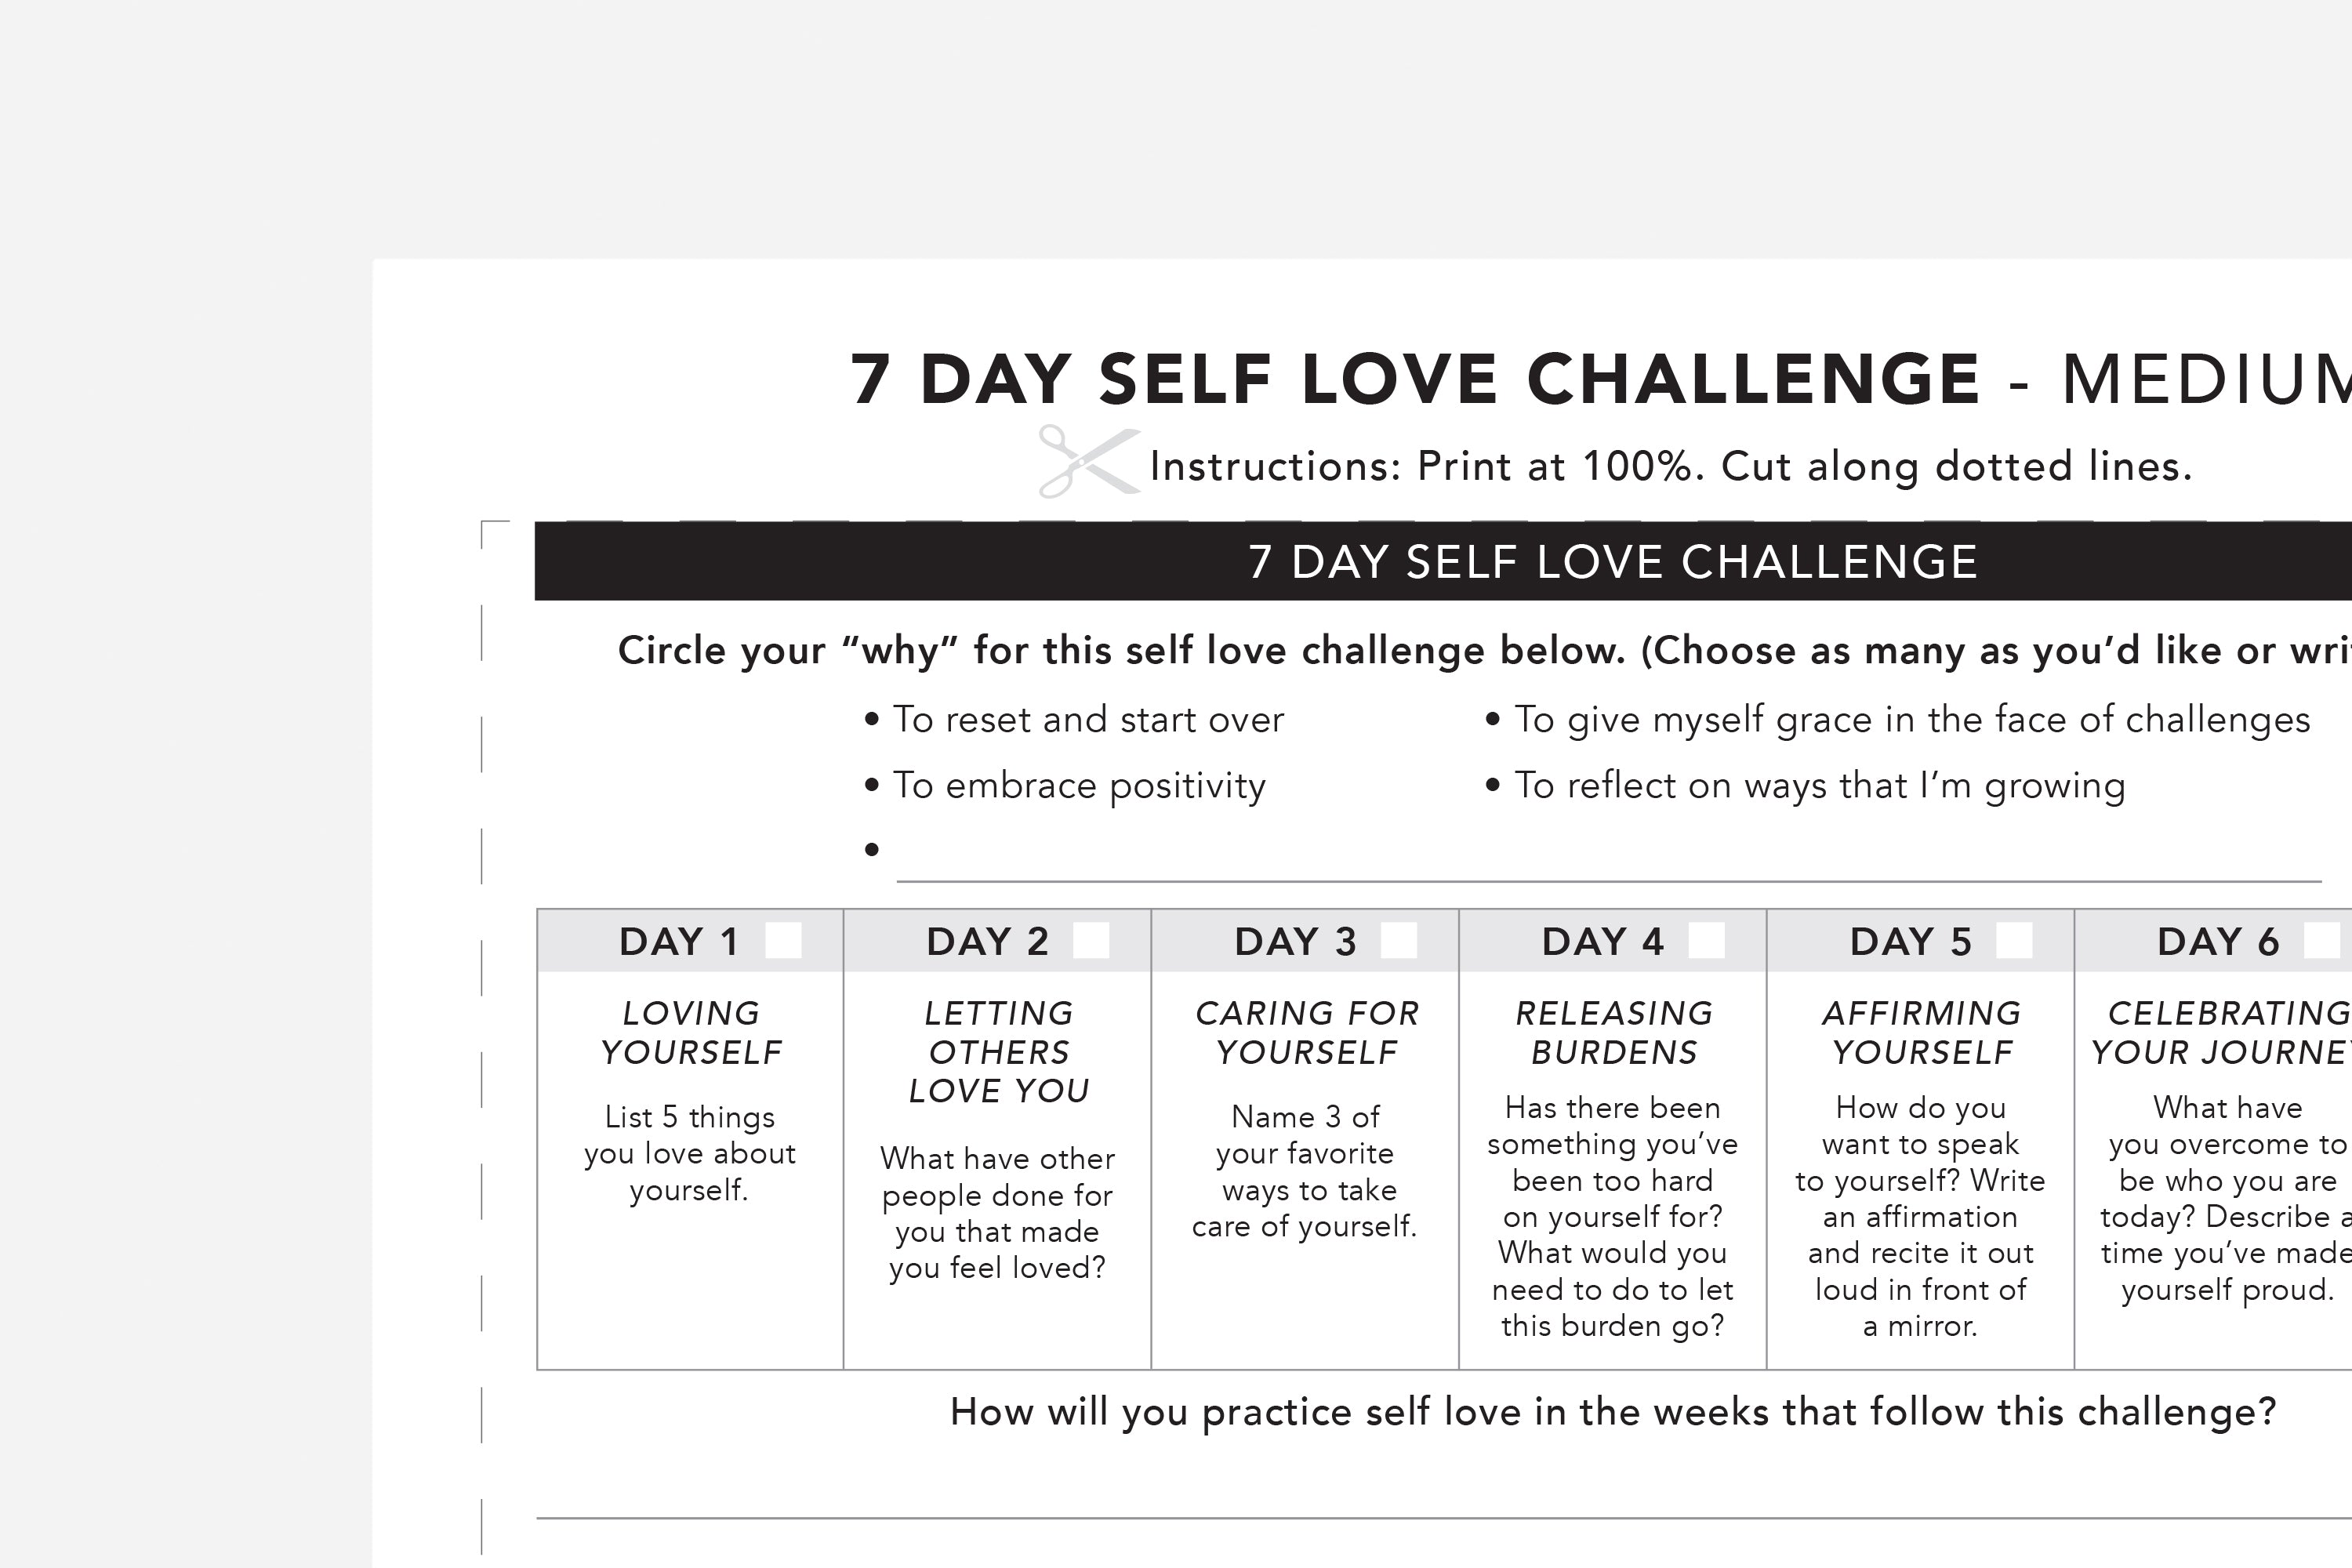 7 Day Self Love Challenge - Passion Planner